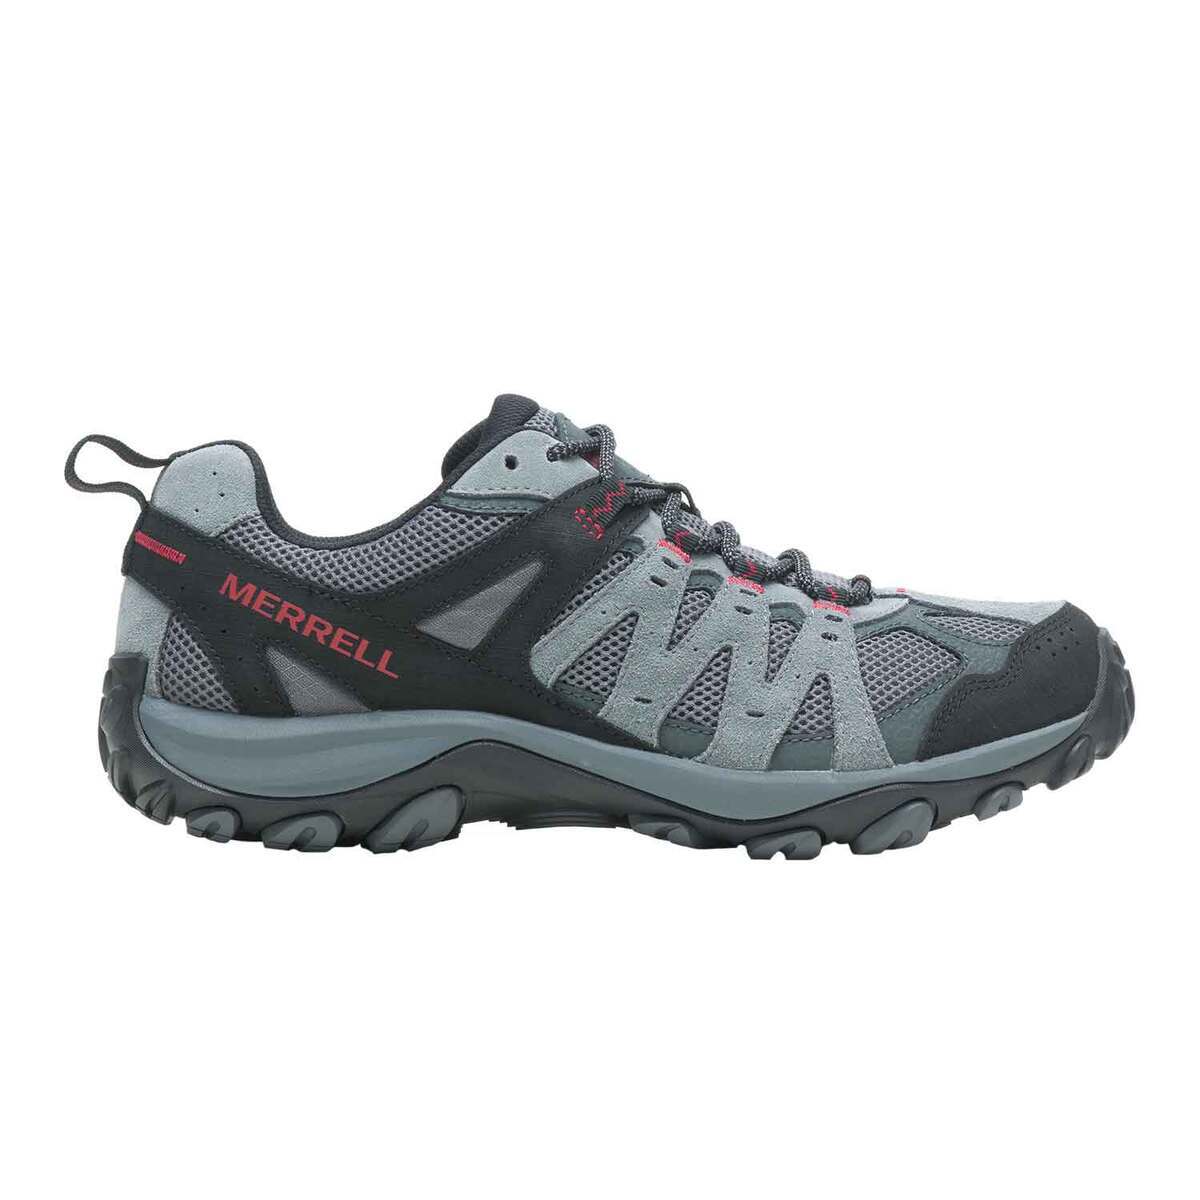 Merrell Men's Accentor 3 Low Hiking Shoes | Sportsman's Warehouse